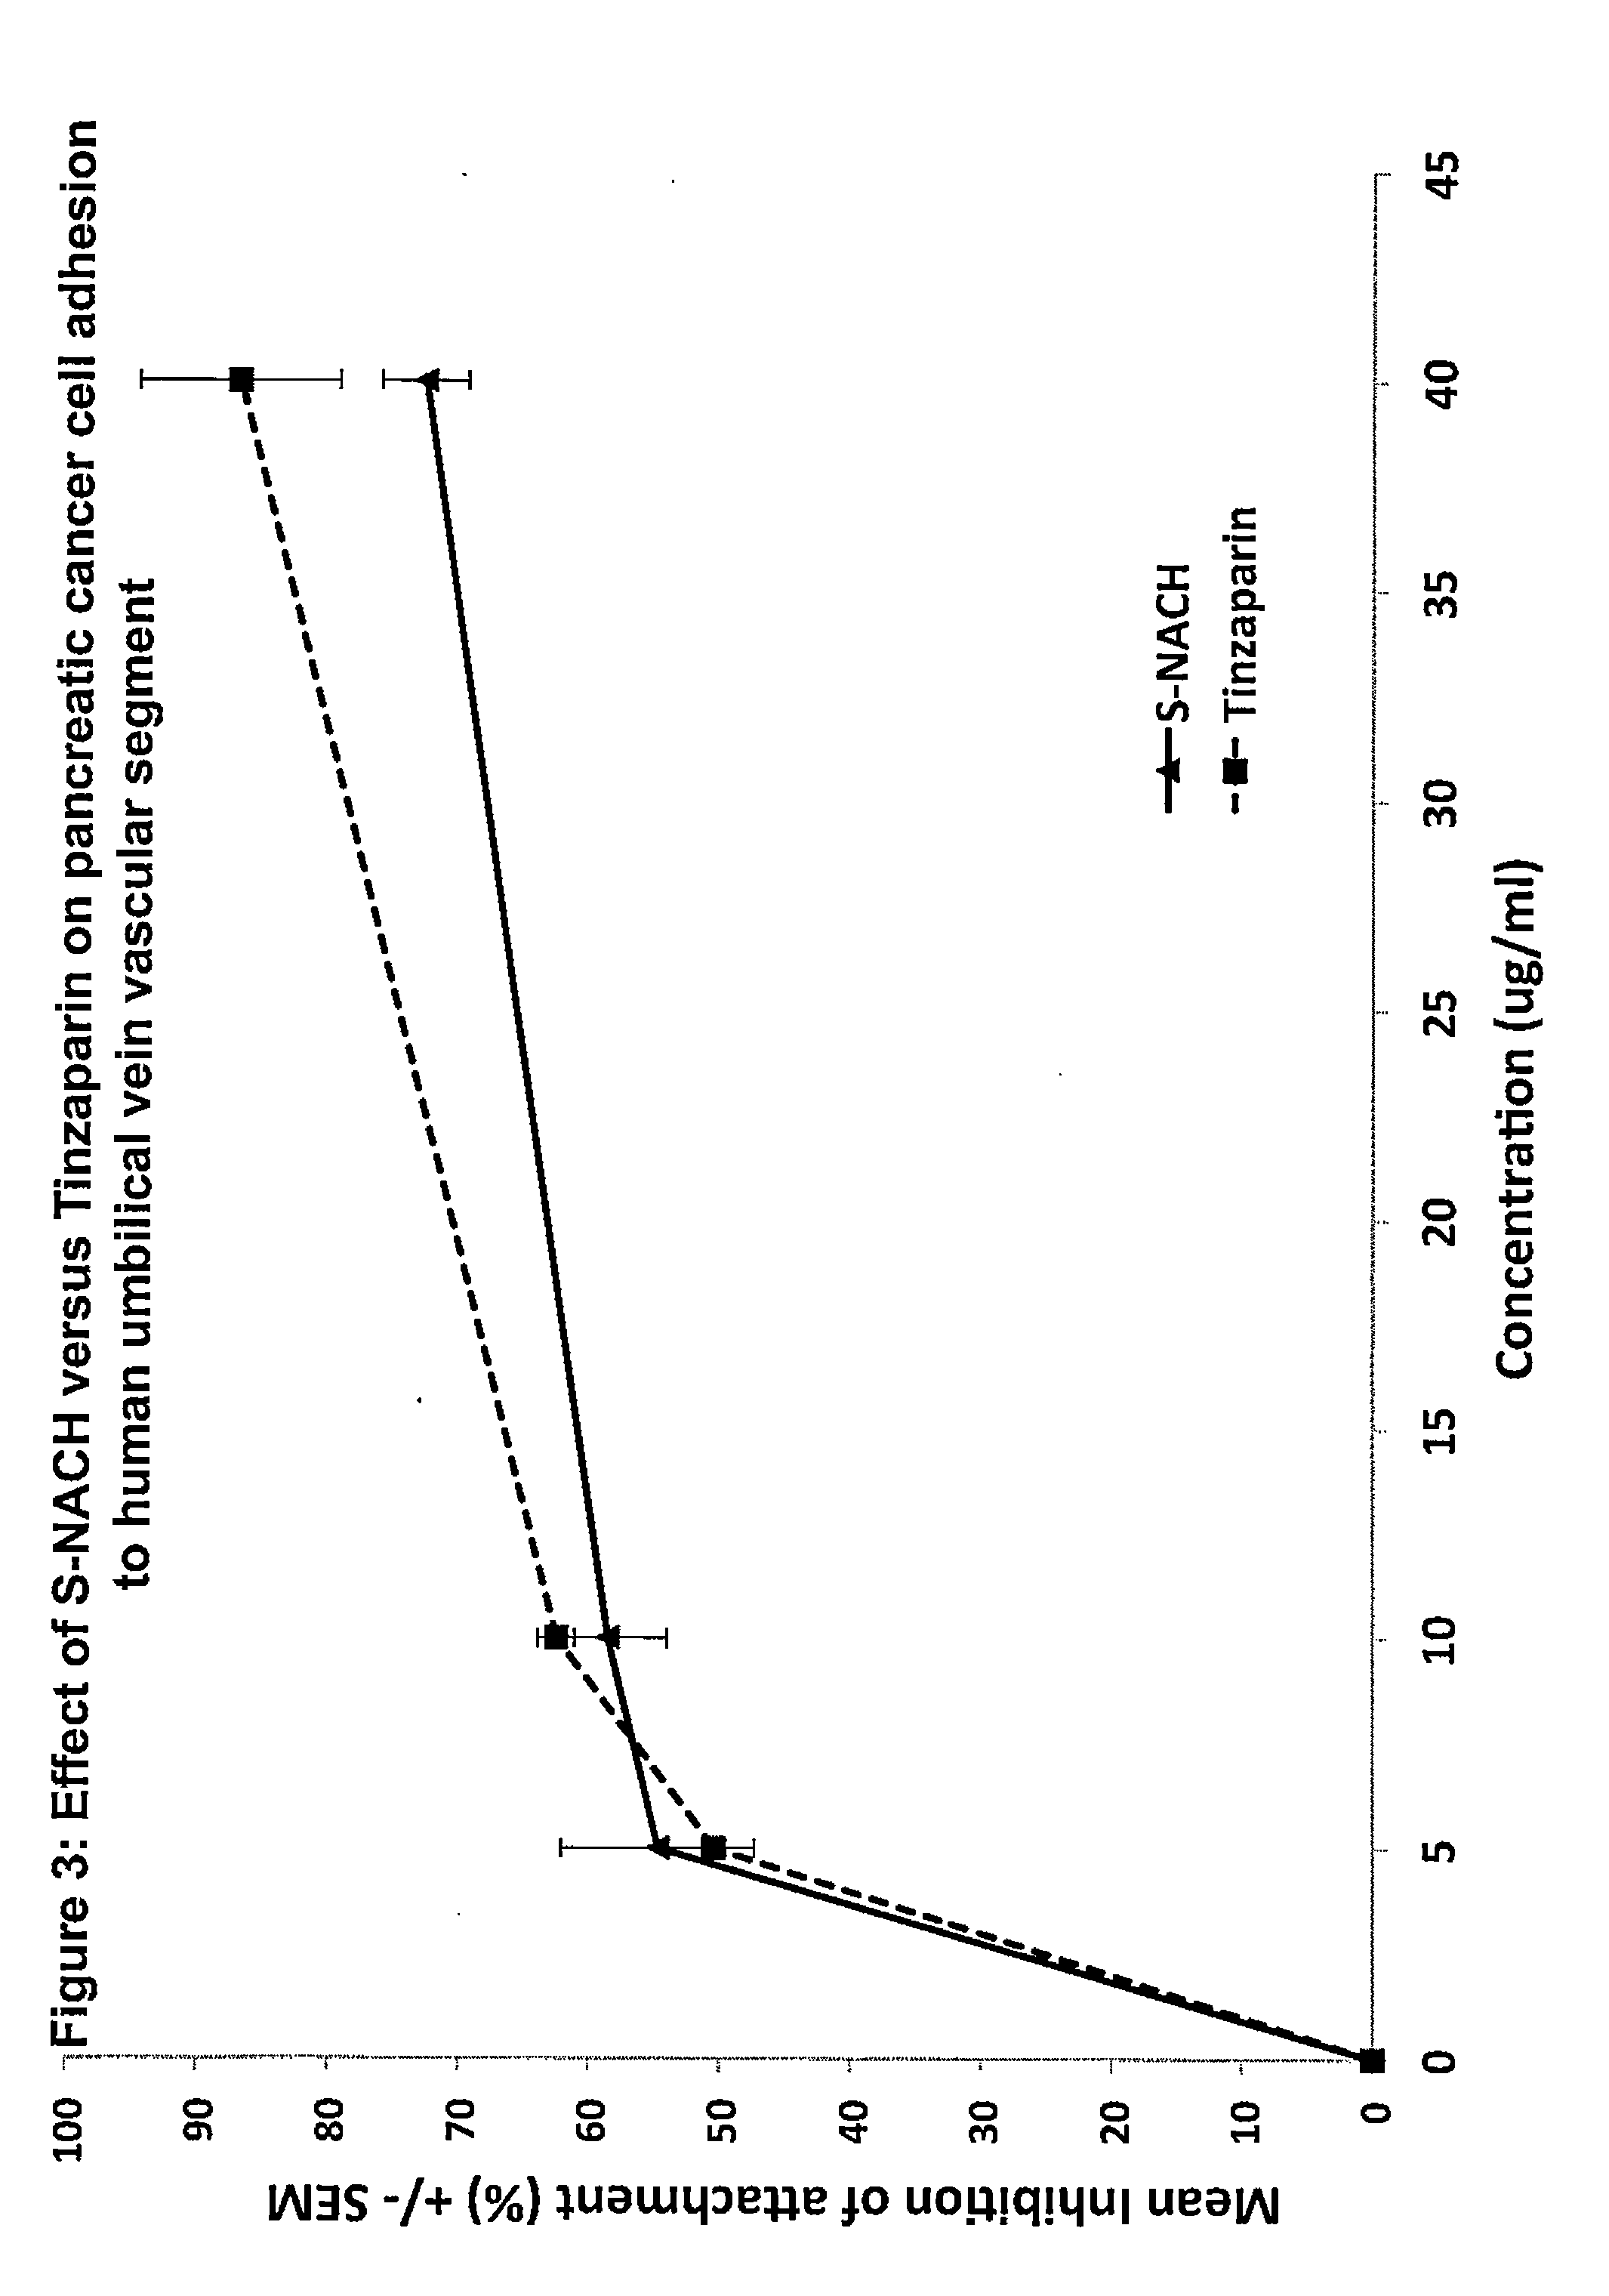 Composition and method for sulfated non-anticoagulant low molecular weight heparins in cancer and tumor metastasis